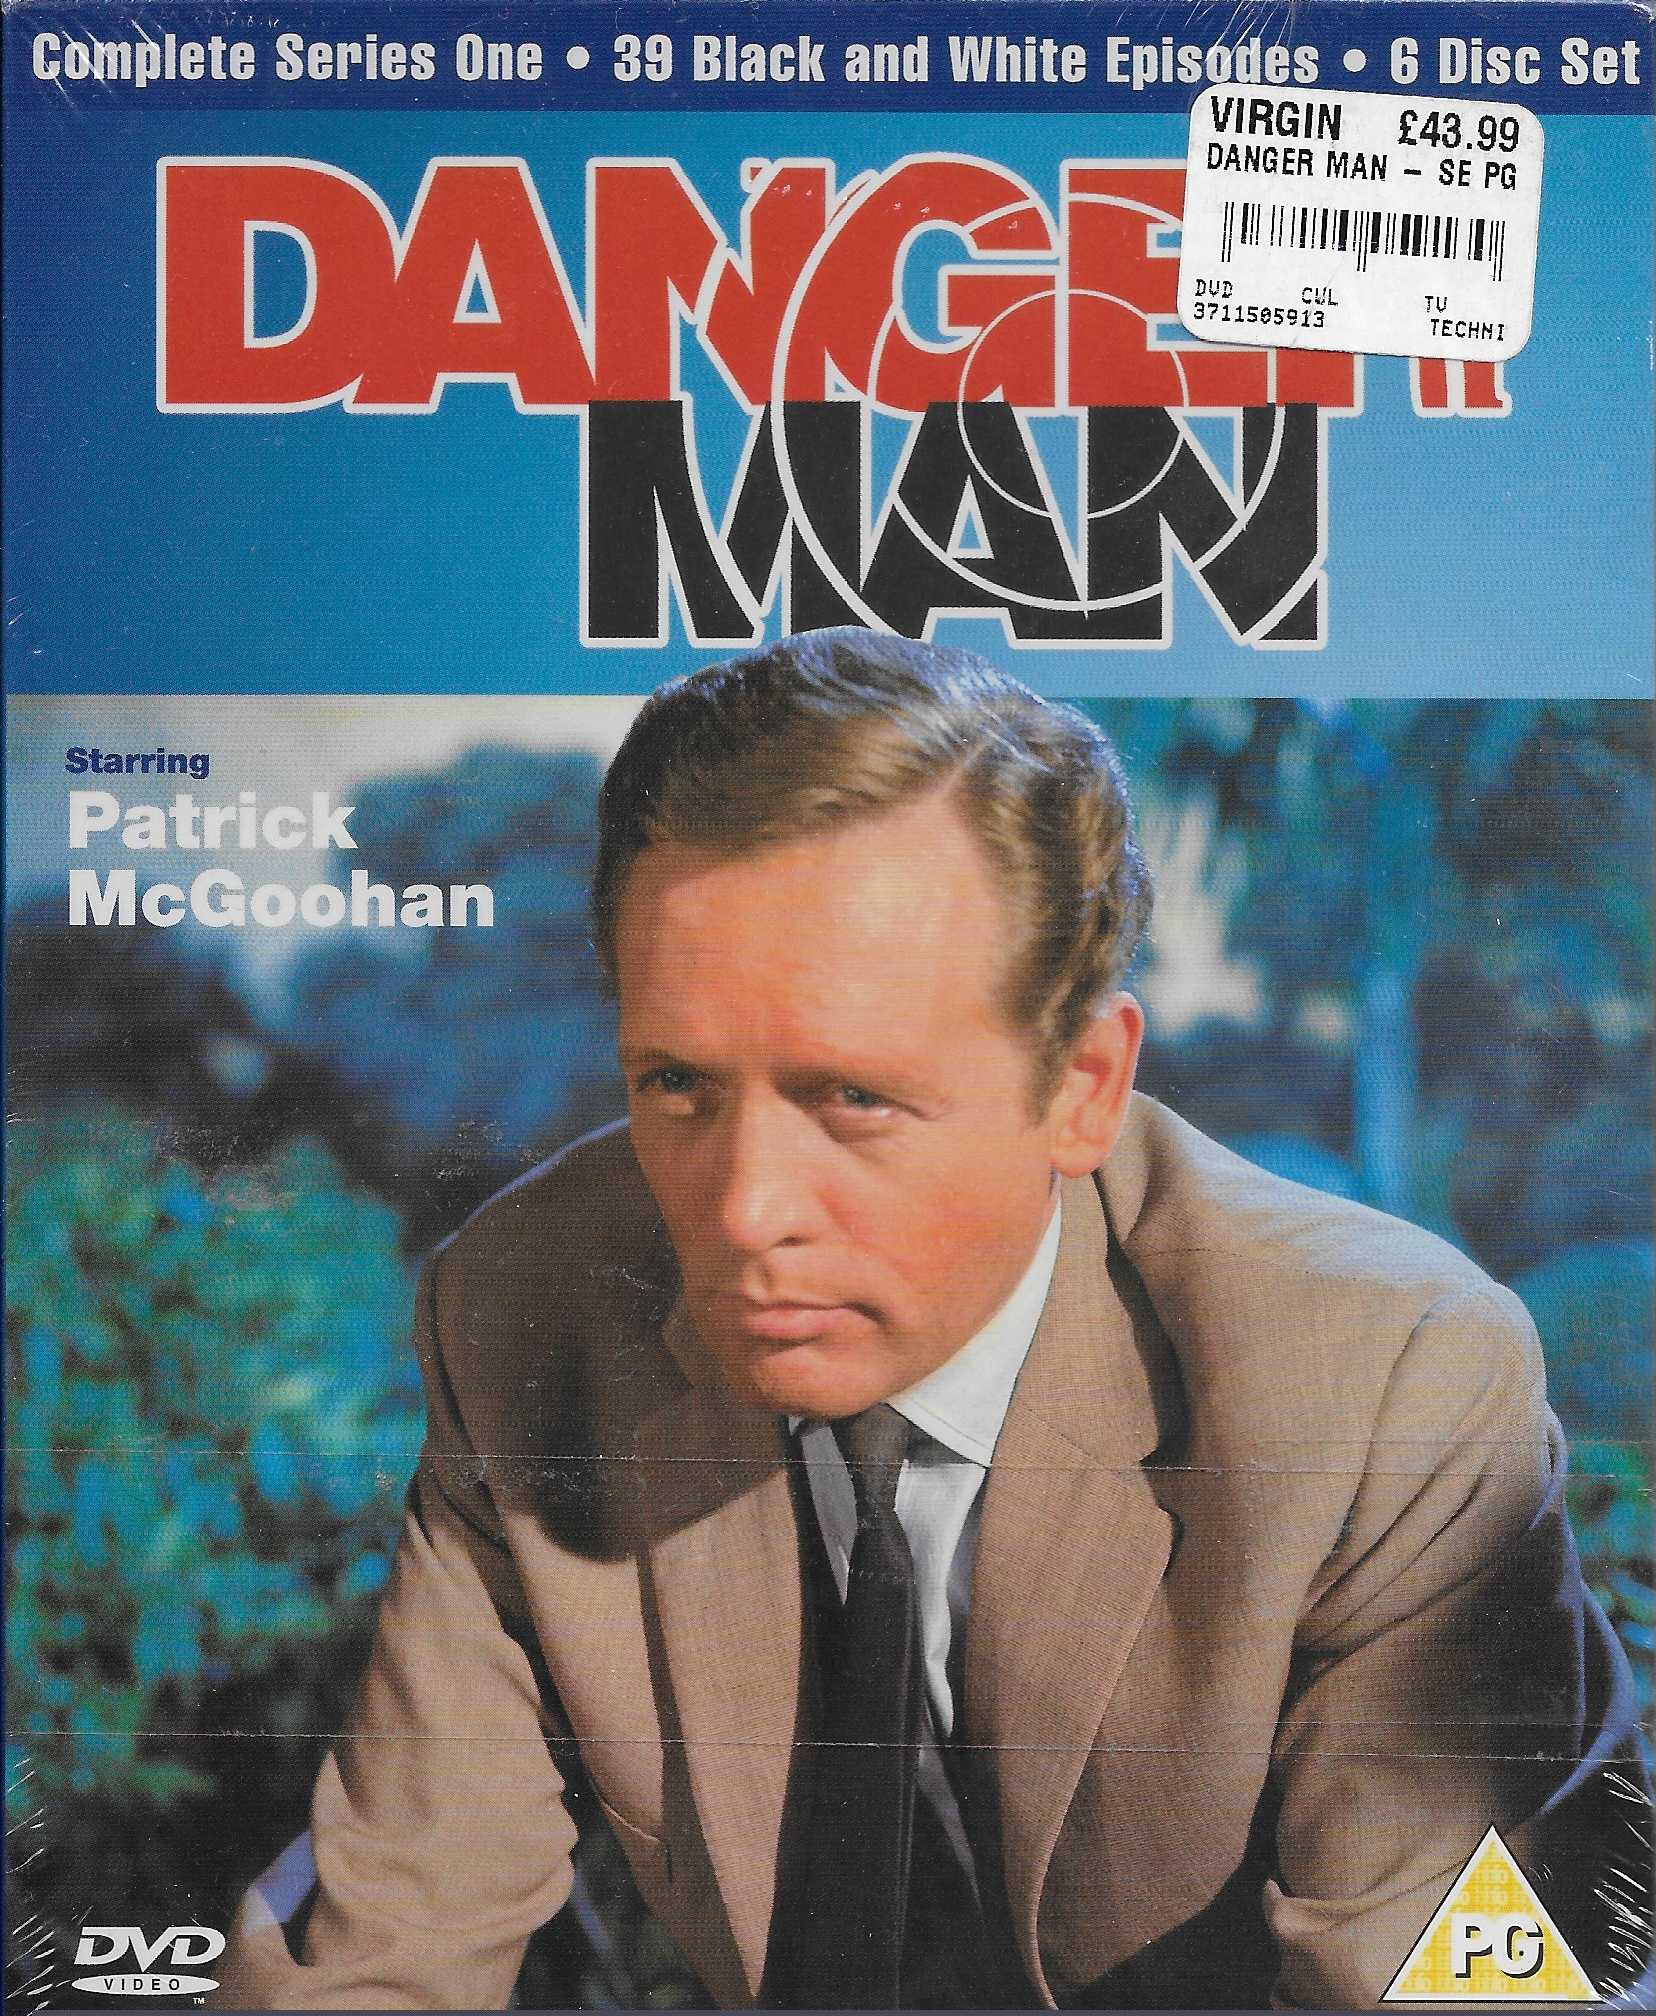 Picture of Dangerman - Complete series 1 by artist Various from ITV, Channel 4 and Channel 5 dvds library